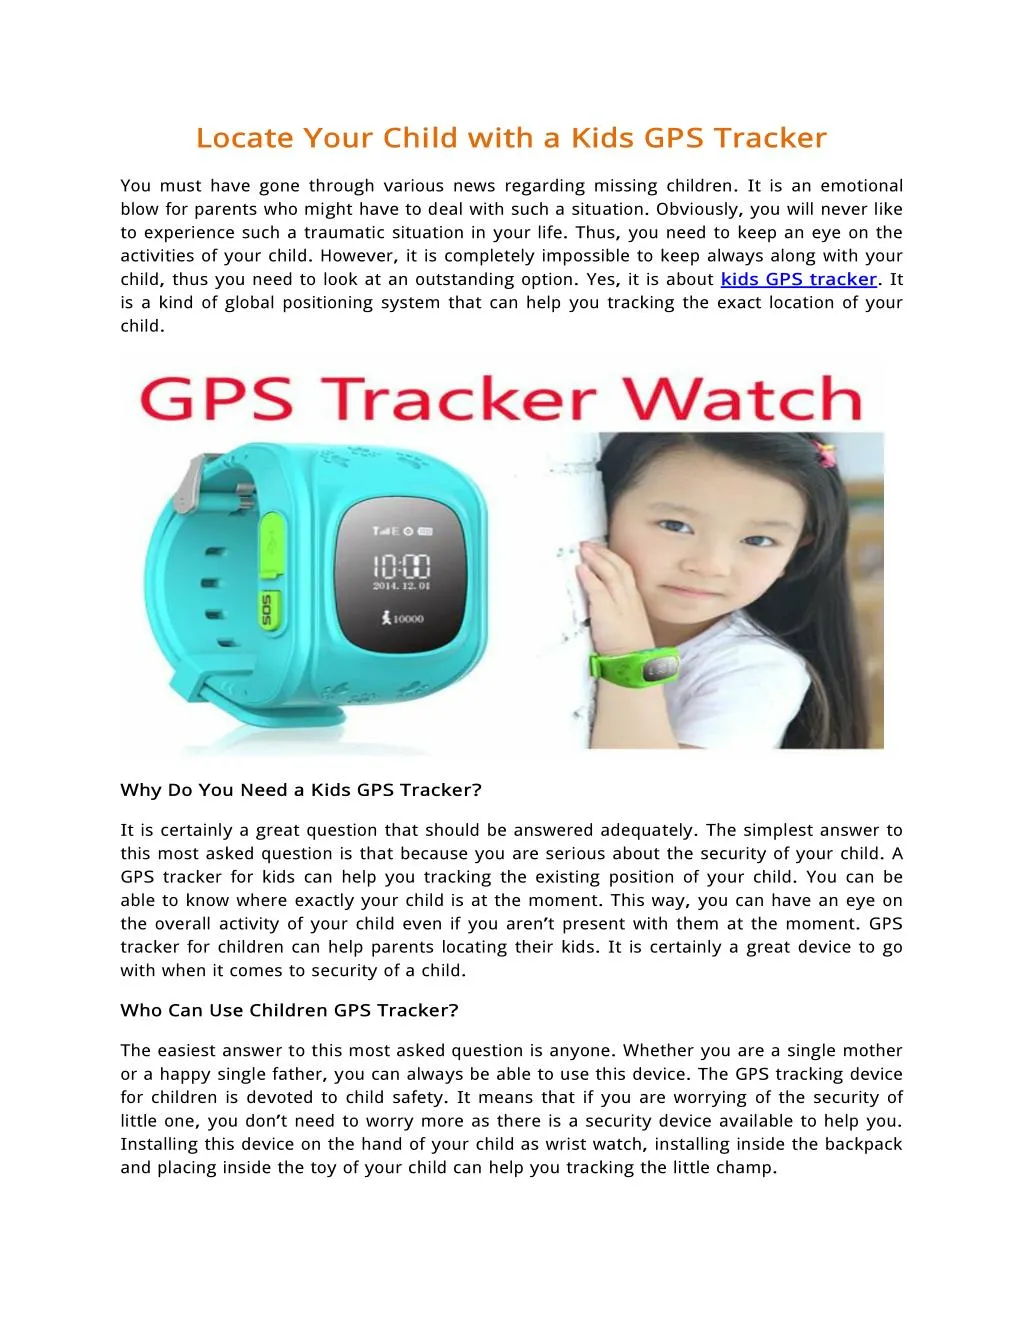 locate y our child w ith a kids gps tracker